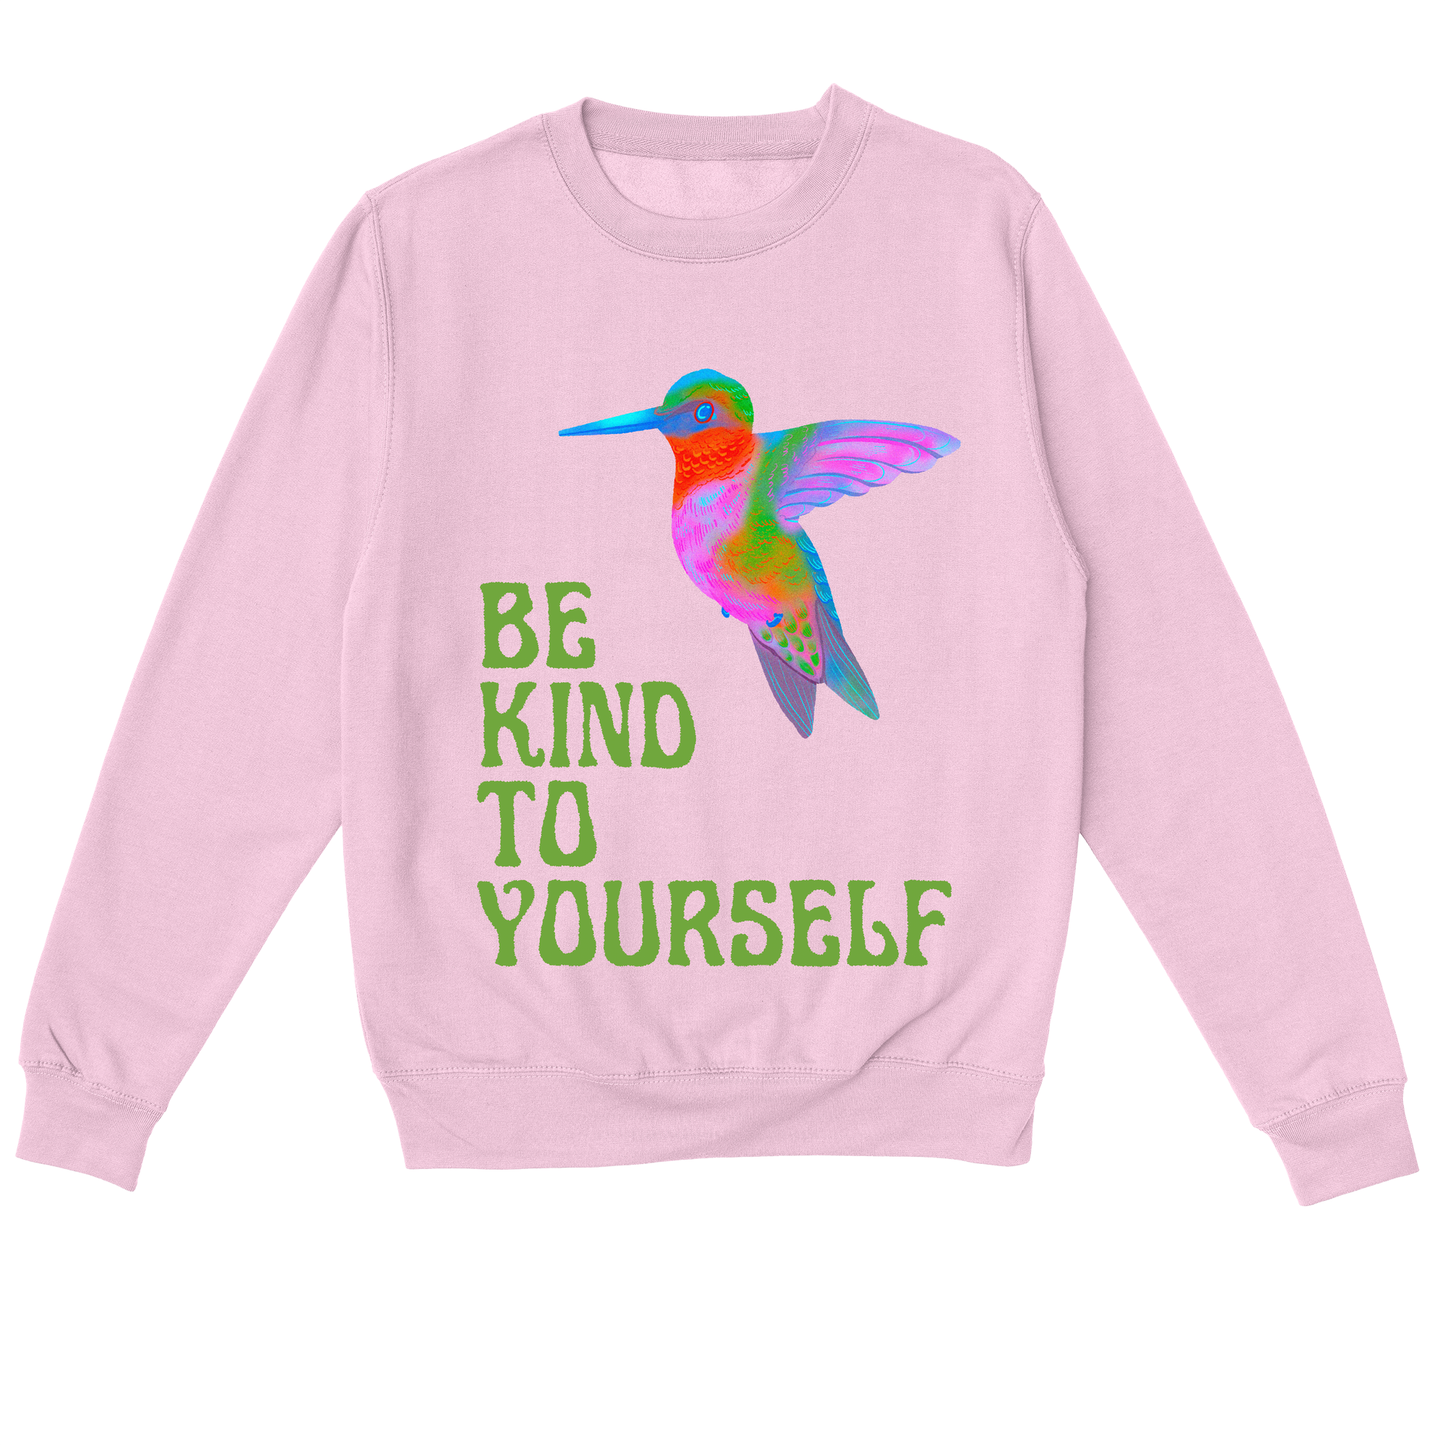 Be kind to yourself - Essentials Classic Sweatshirt